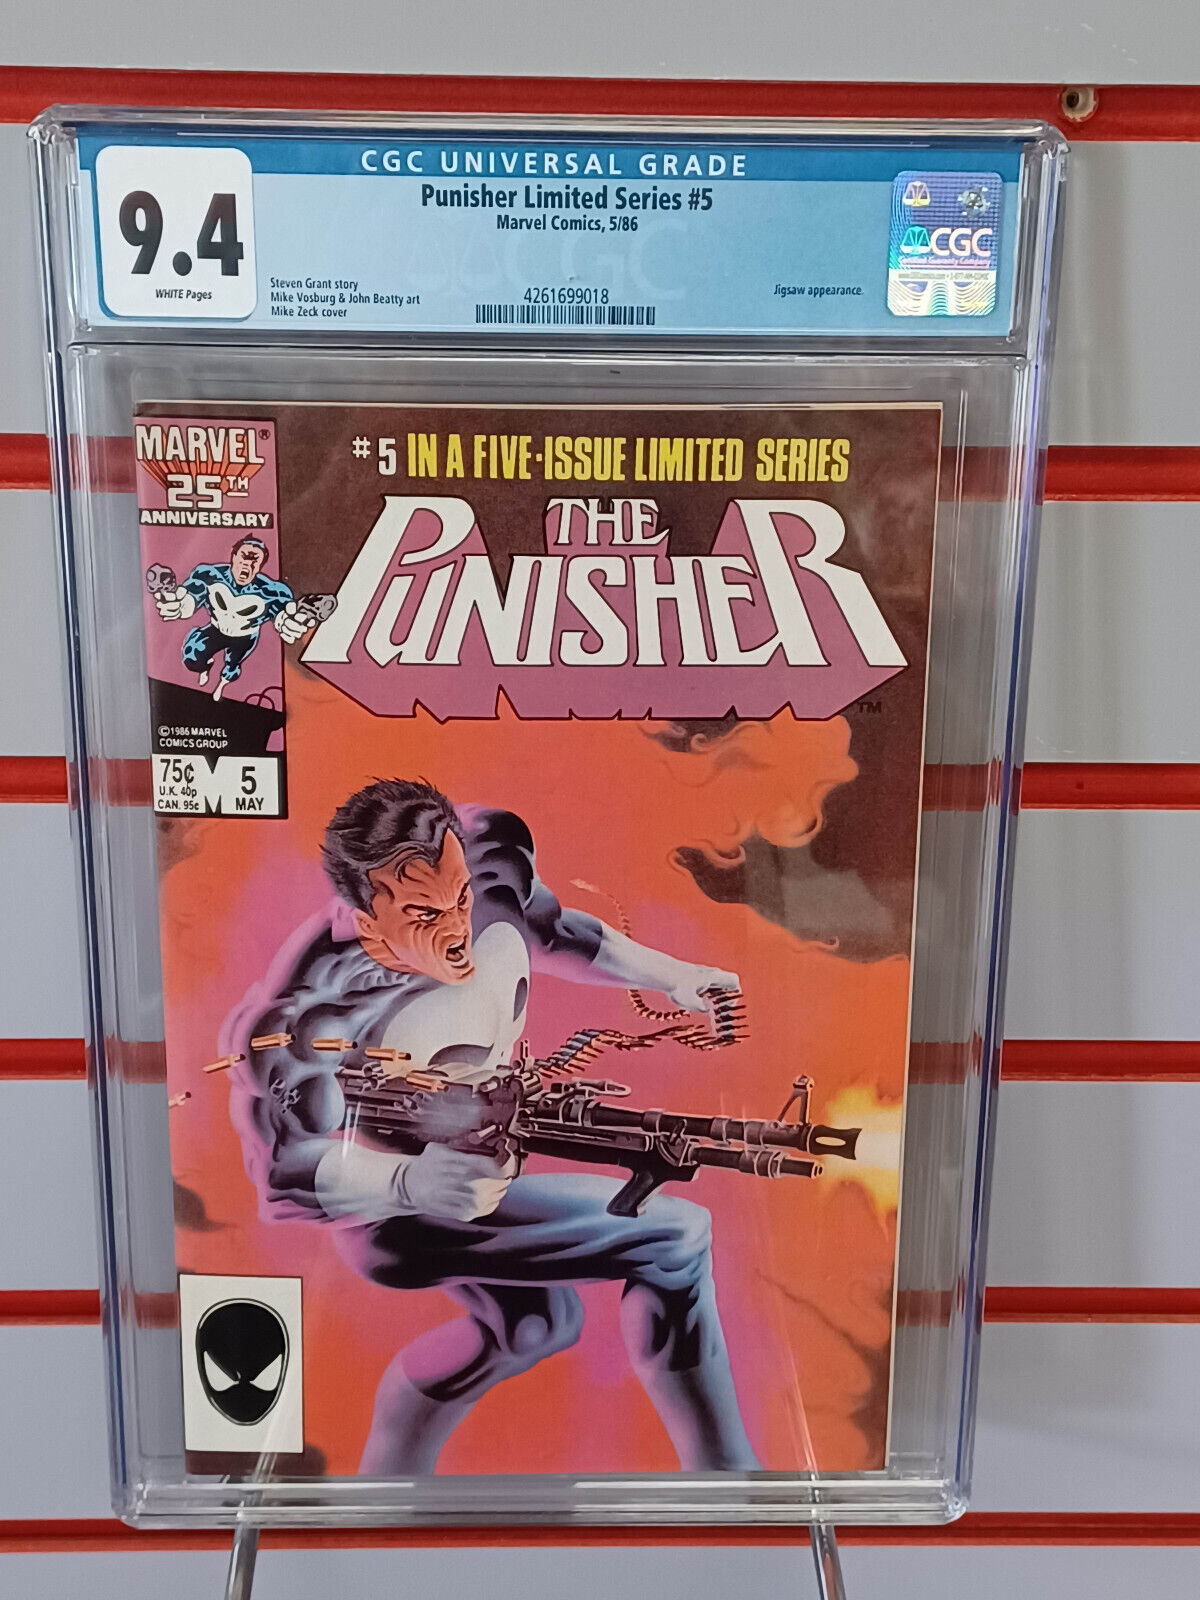 PUNISHER Limited Series #5 (Marvel Comics, 1986) CGC Graded 9.4 ~ White Pages